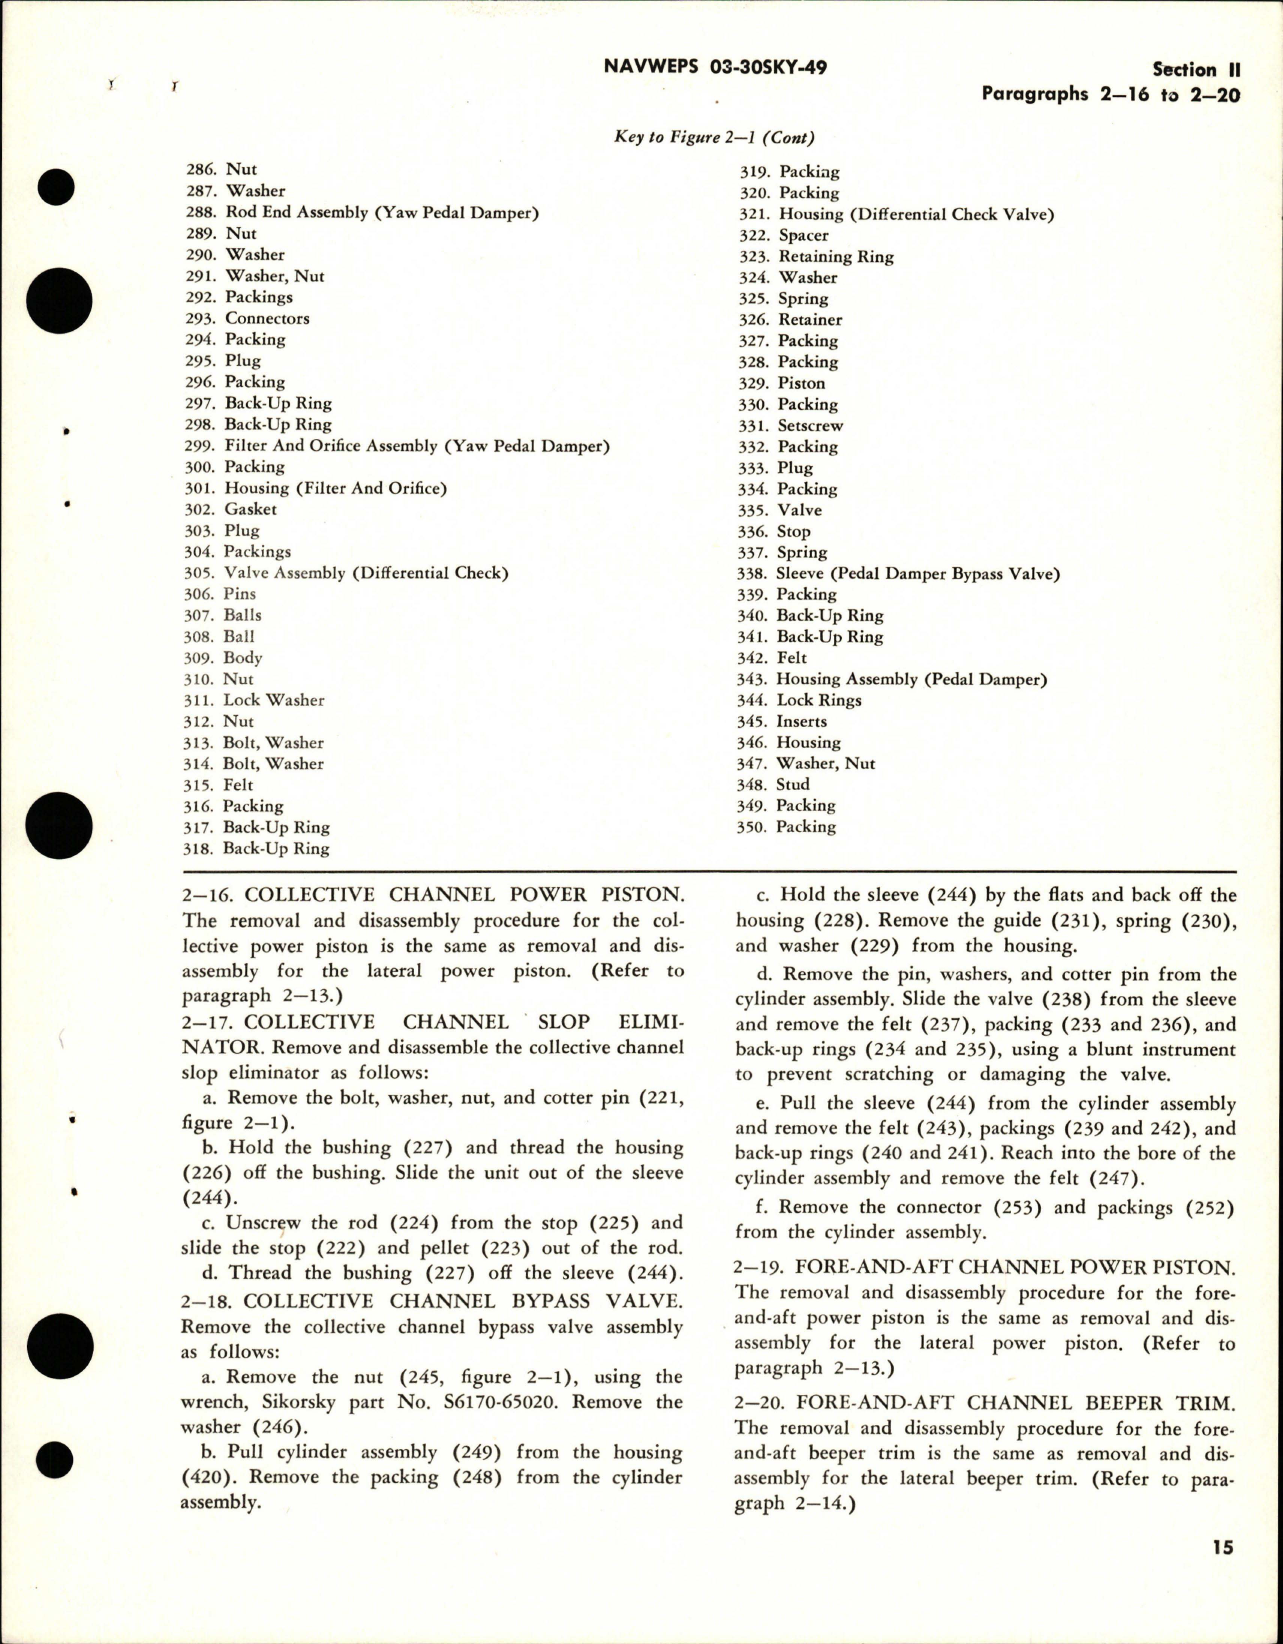 Sample page 9 from AirCorps Library document: Overhaul Instructions for Auxiliary Servocylinder Assembly - Parts S6165-61500-6, S6165-61500-7, and S6165-61500-10